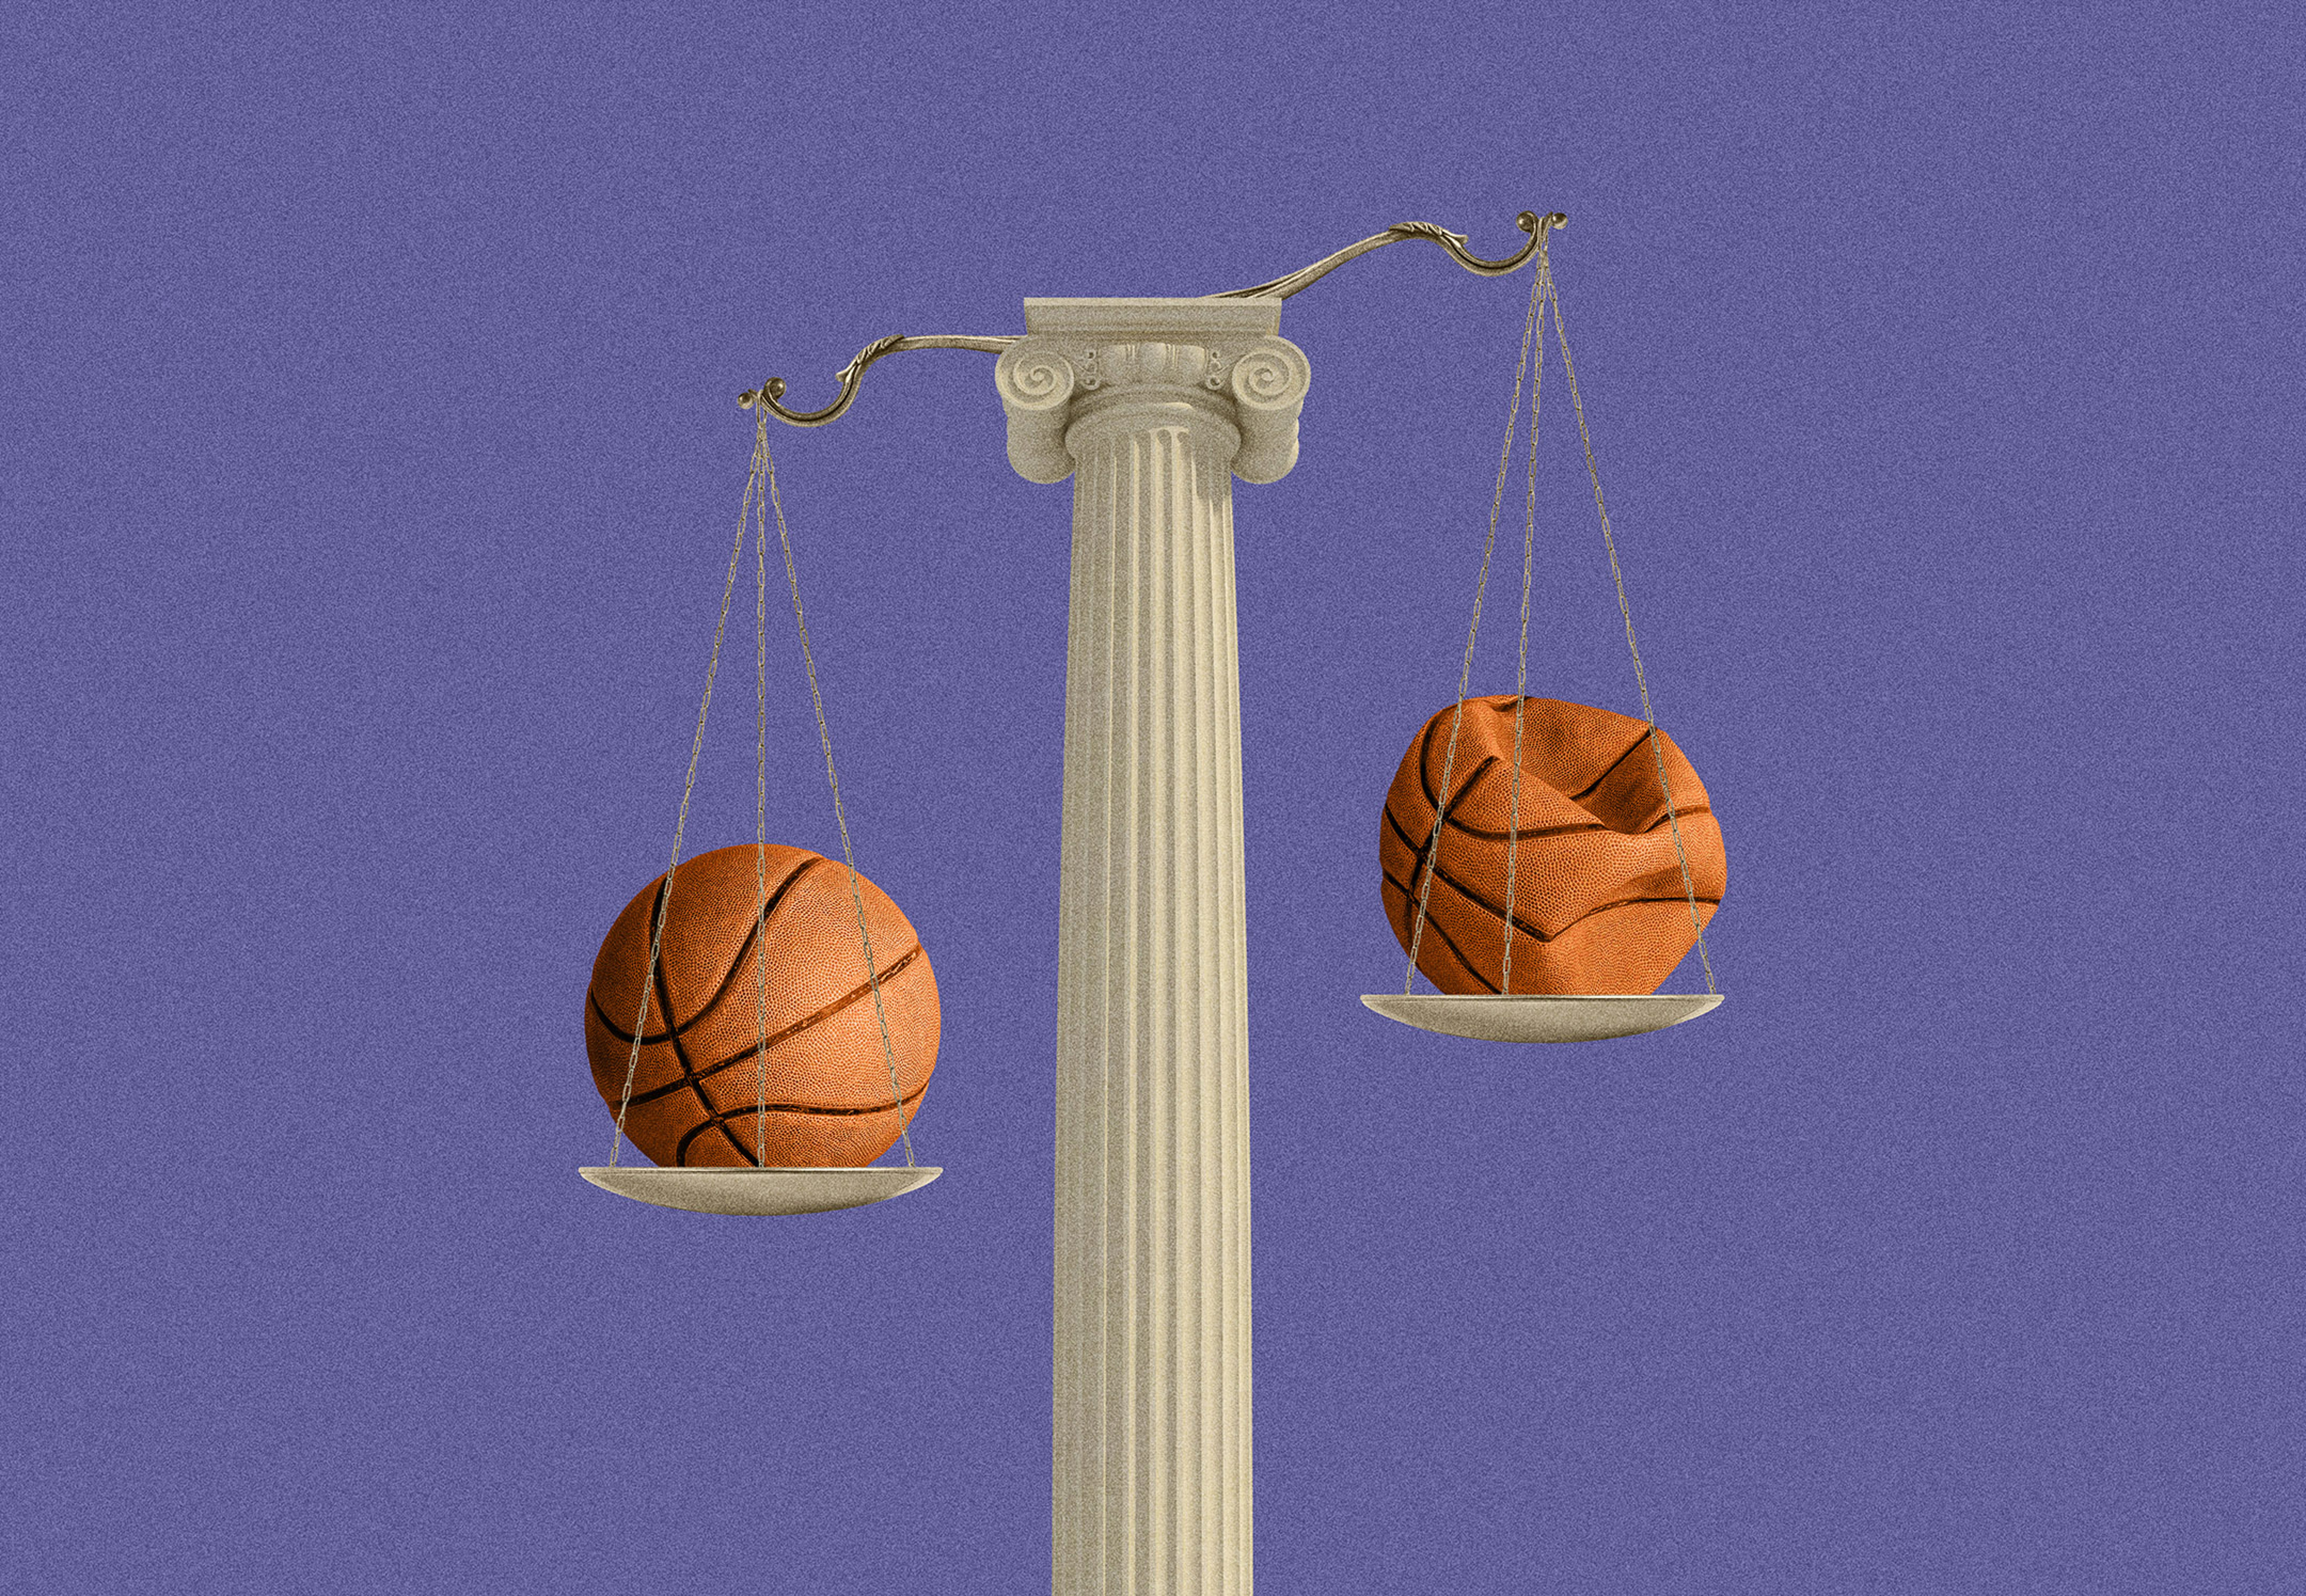 Women in sports: Title IX and the Battle of the Sexes